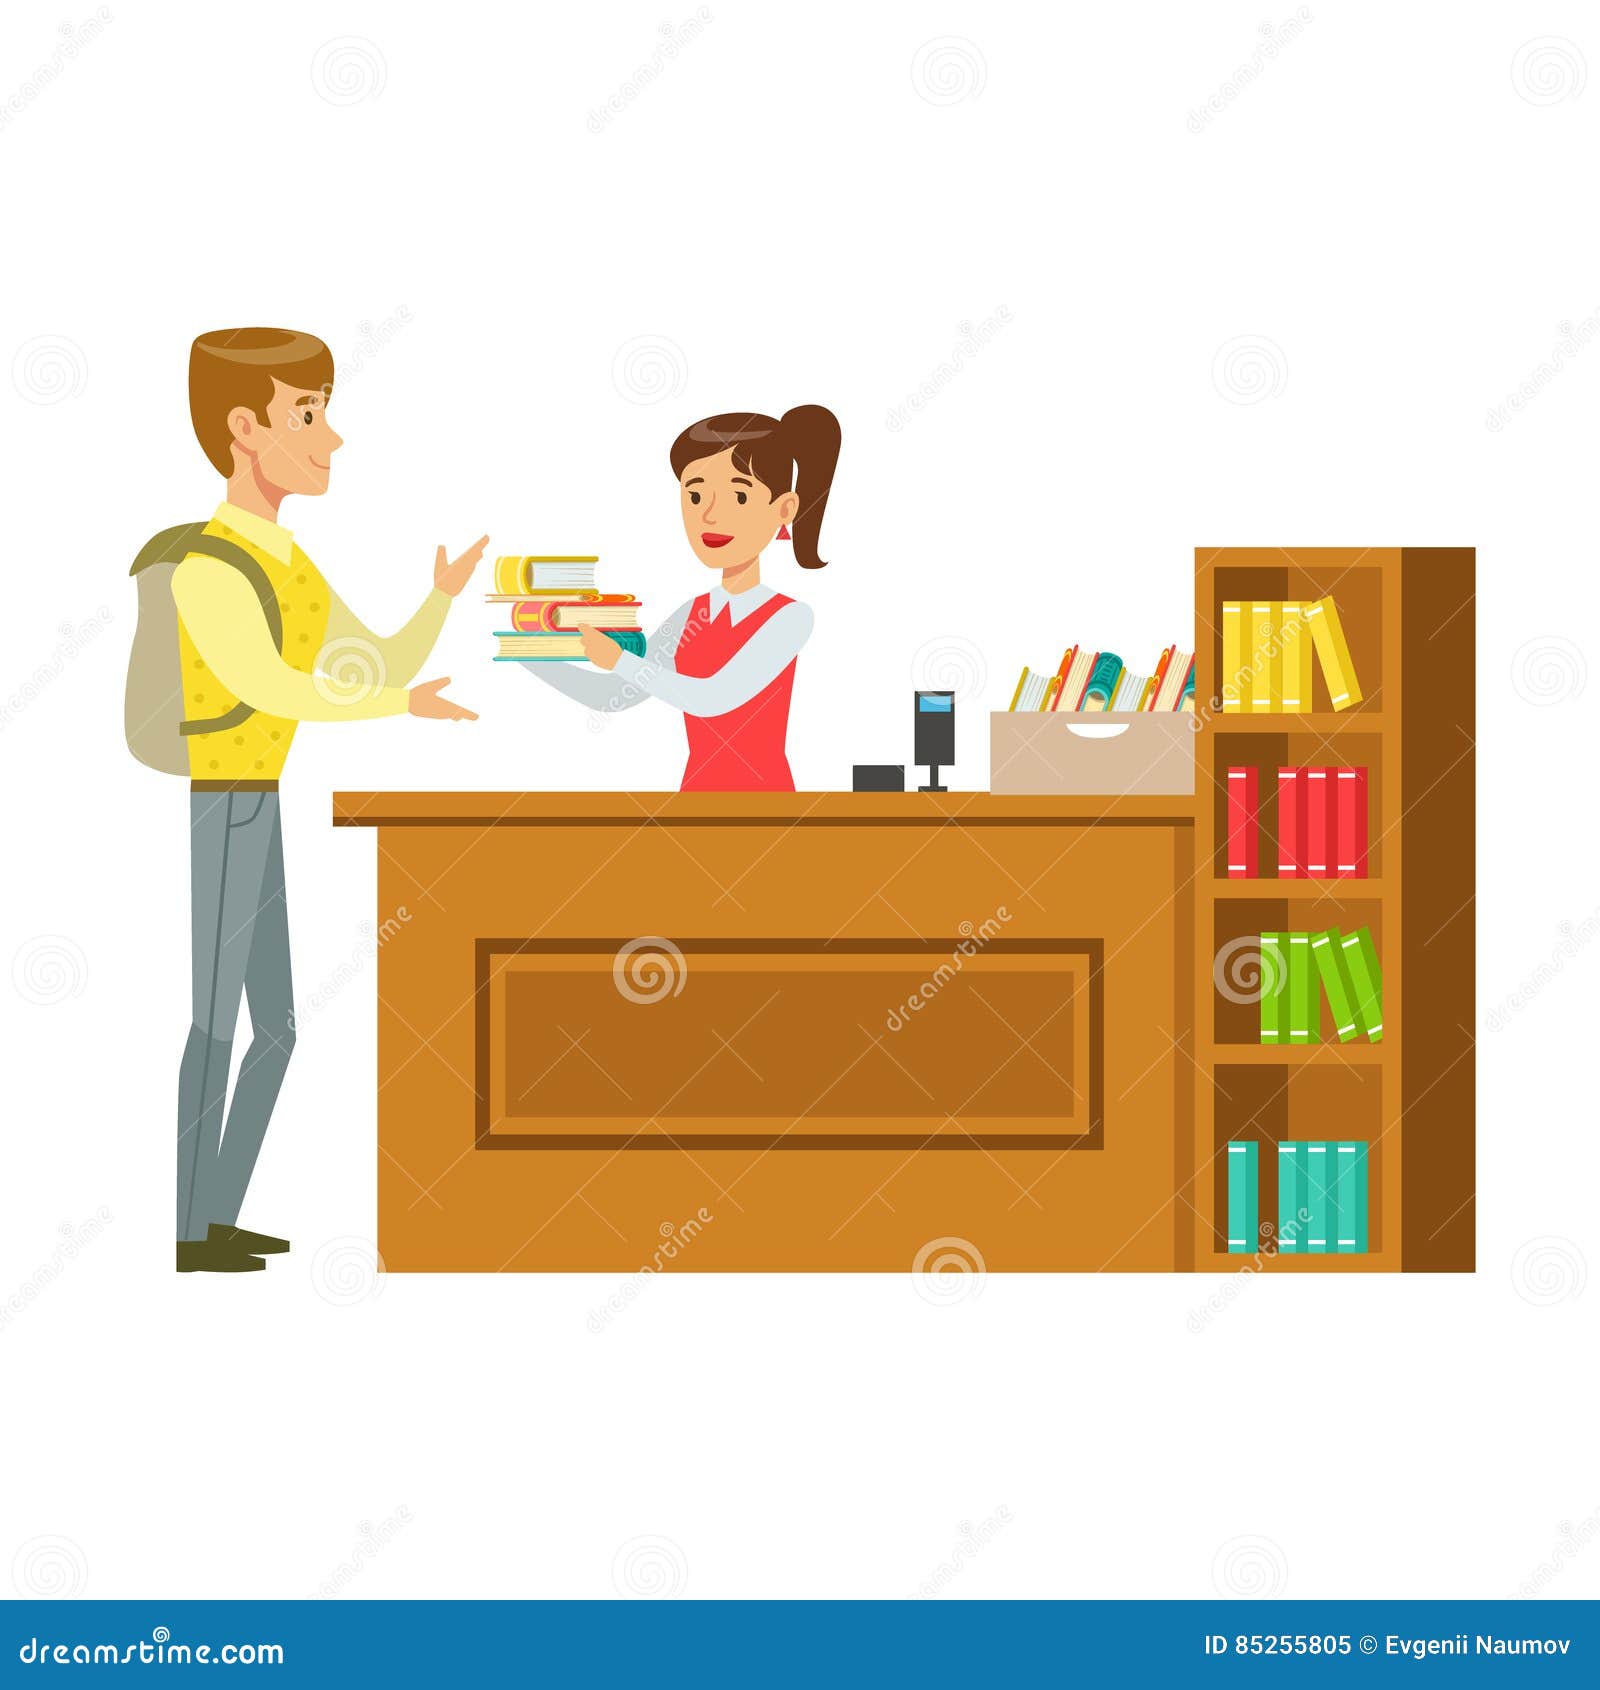 man taking the books fro the librarian, smiling person in the library  